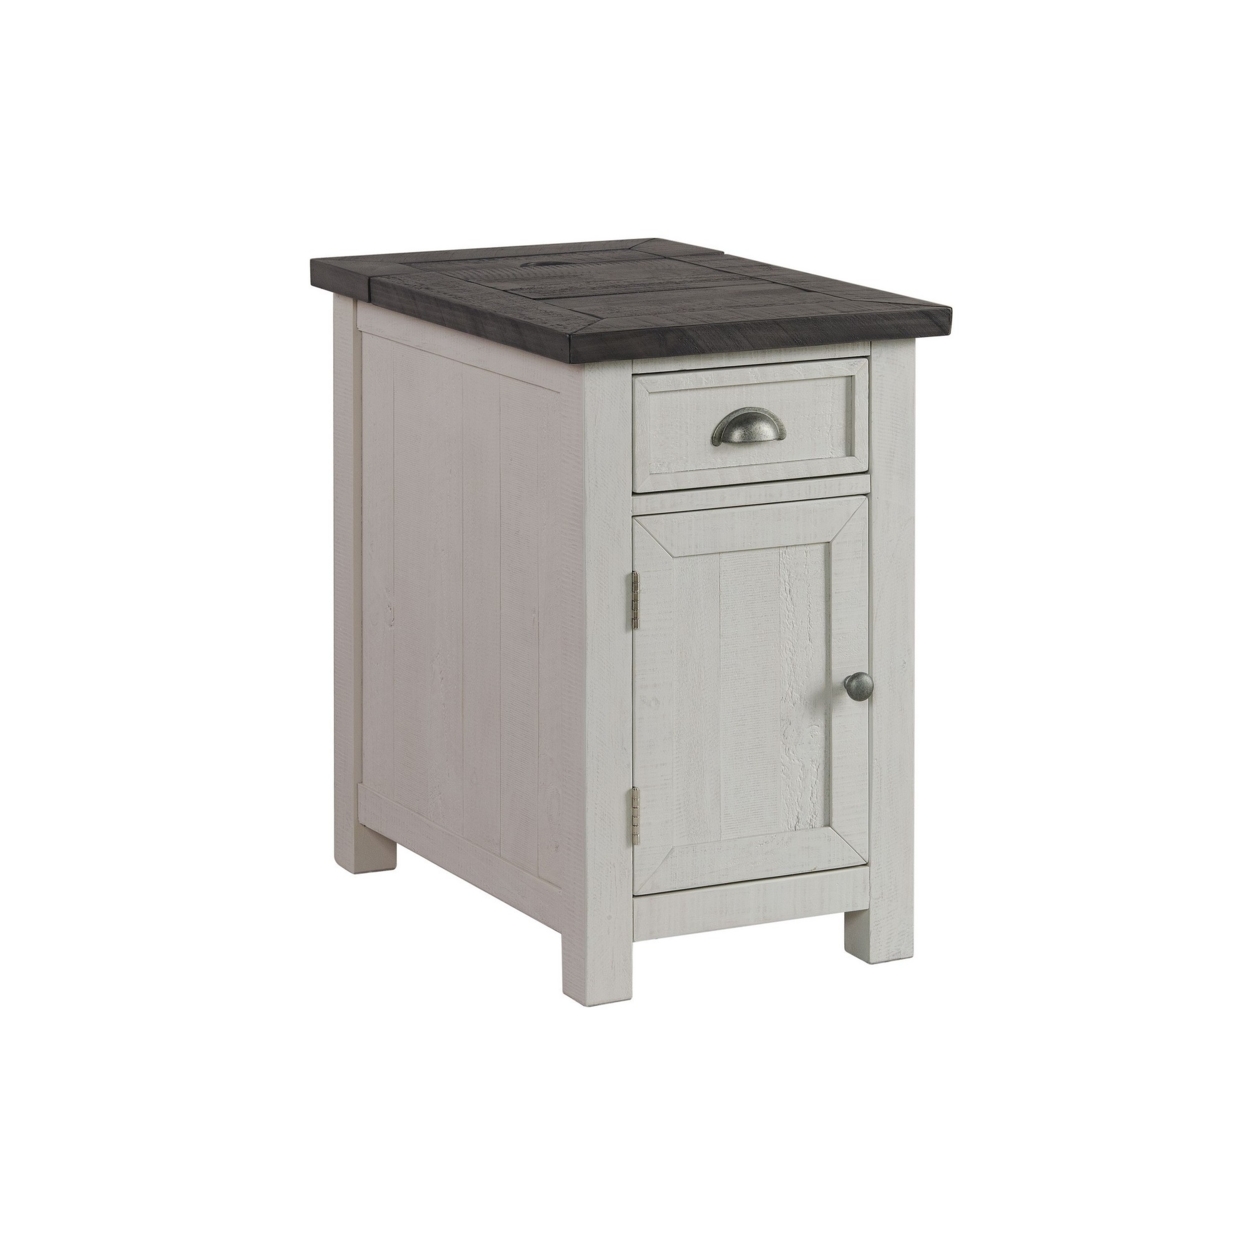 Chairside Table With 1 Drawer And USB Ports, White And Gray- Saltoro Sherpi